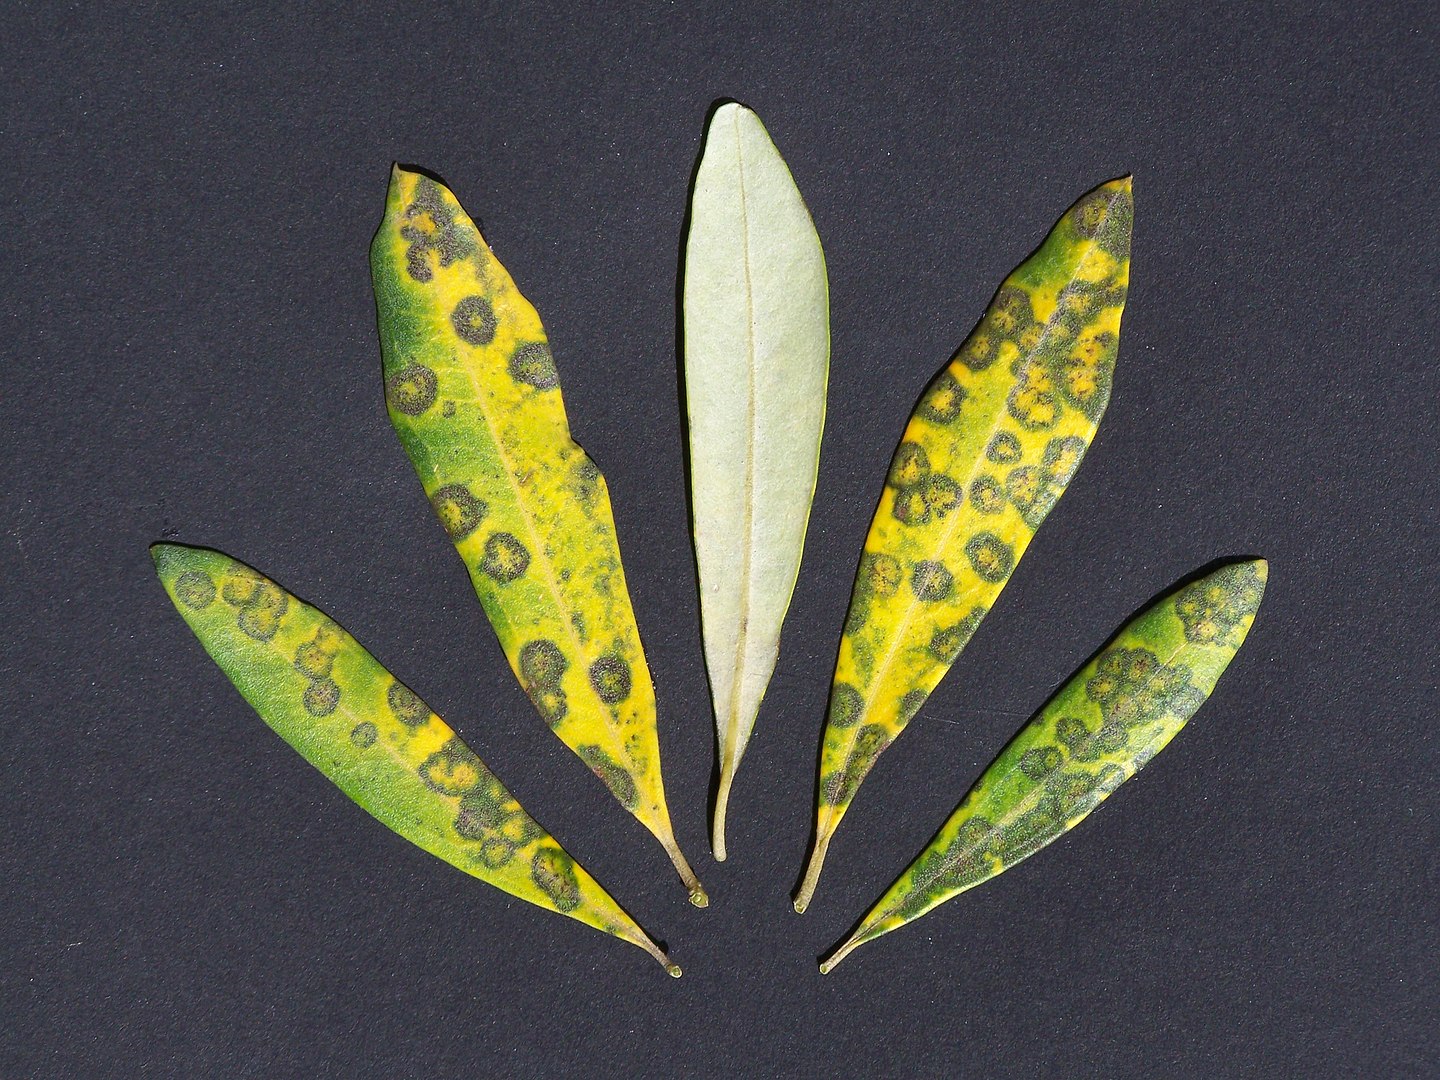 Oil leaves affected by Olive Peacock Spot